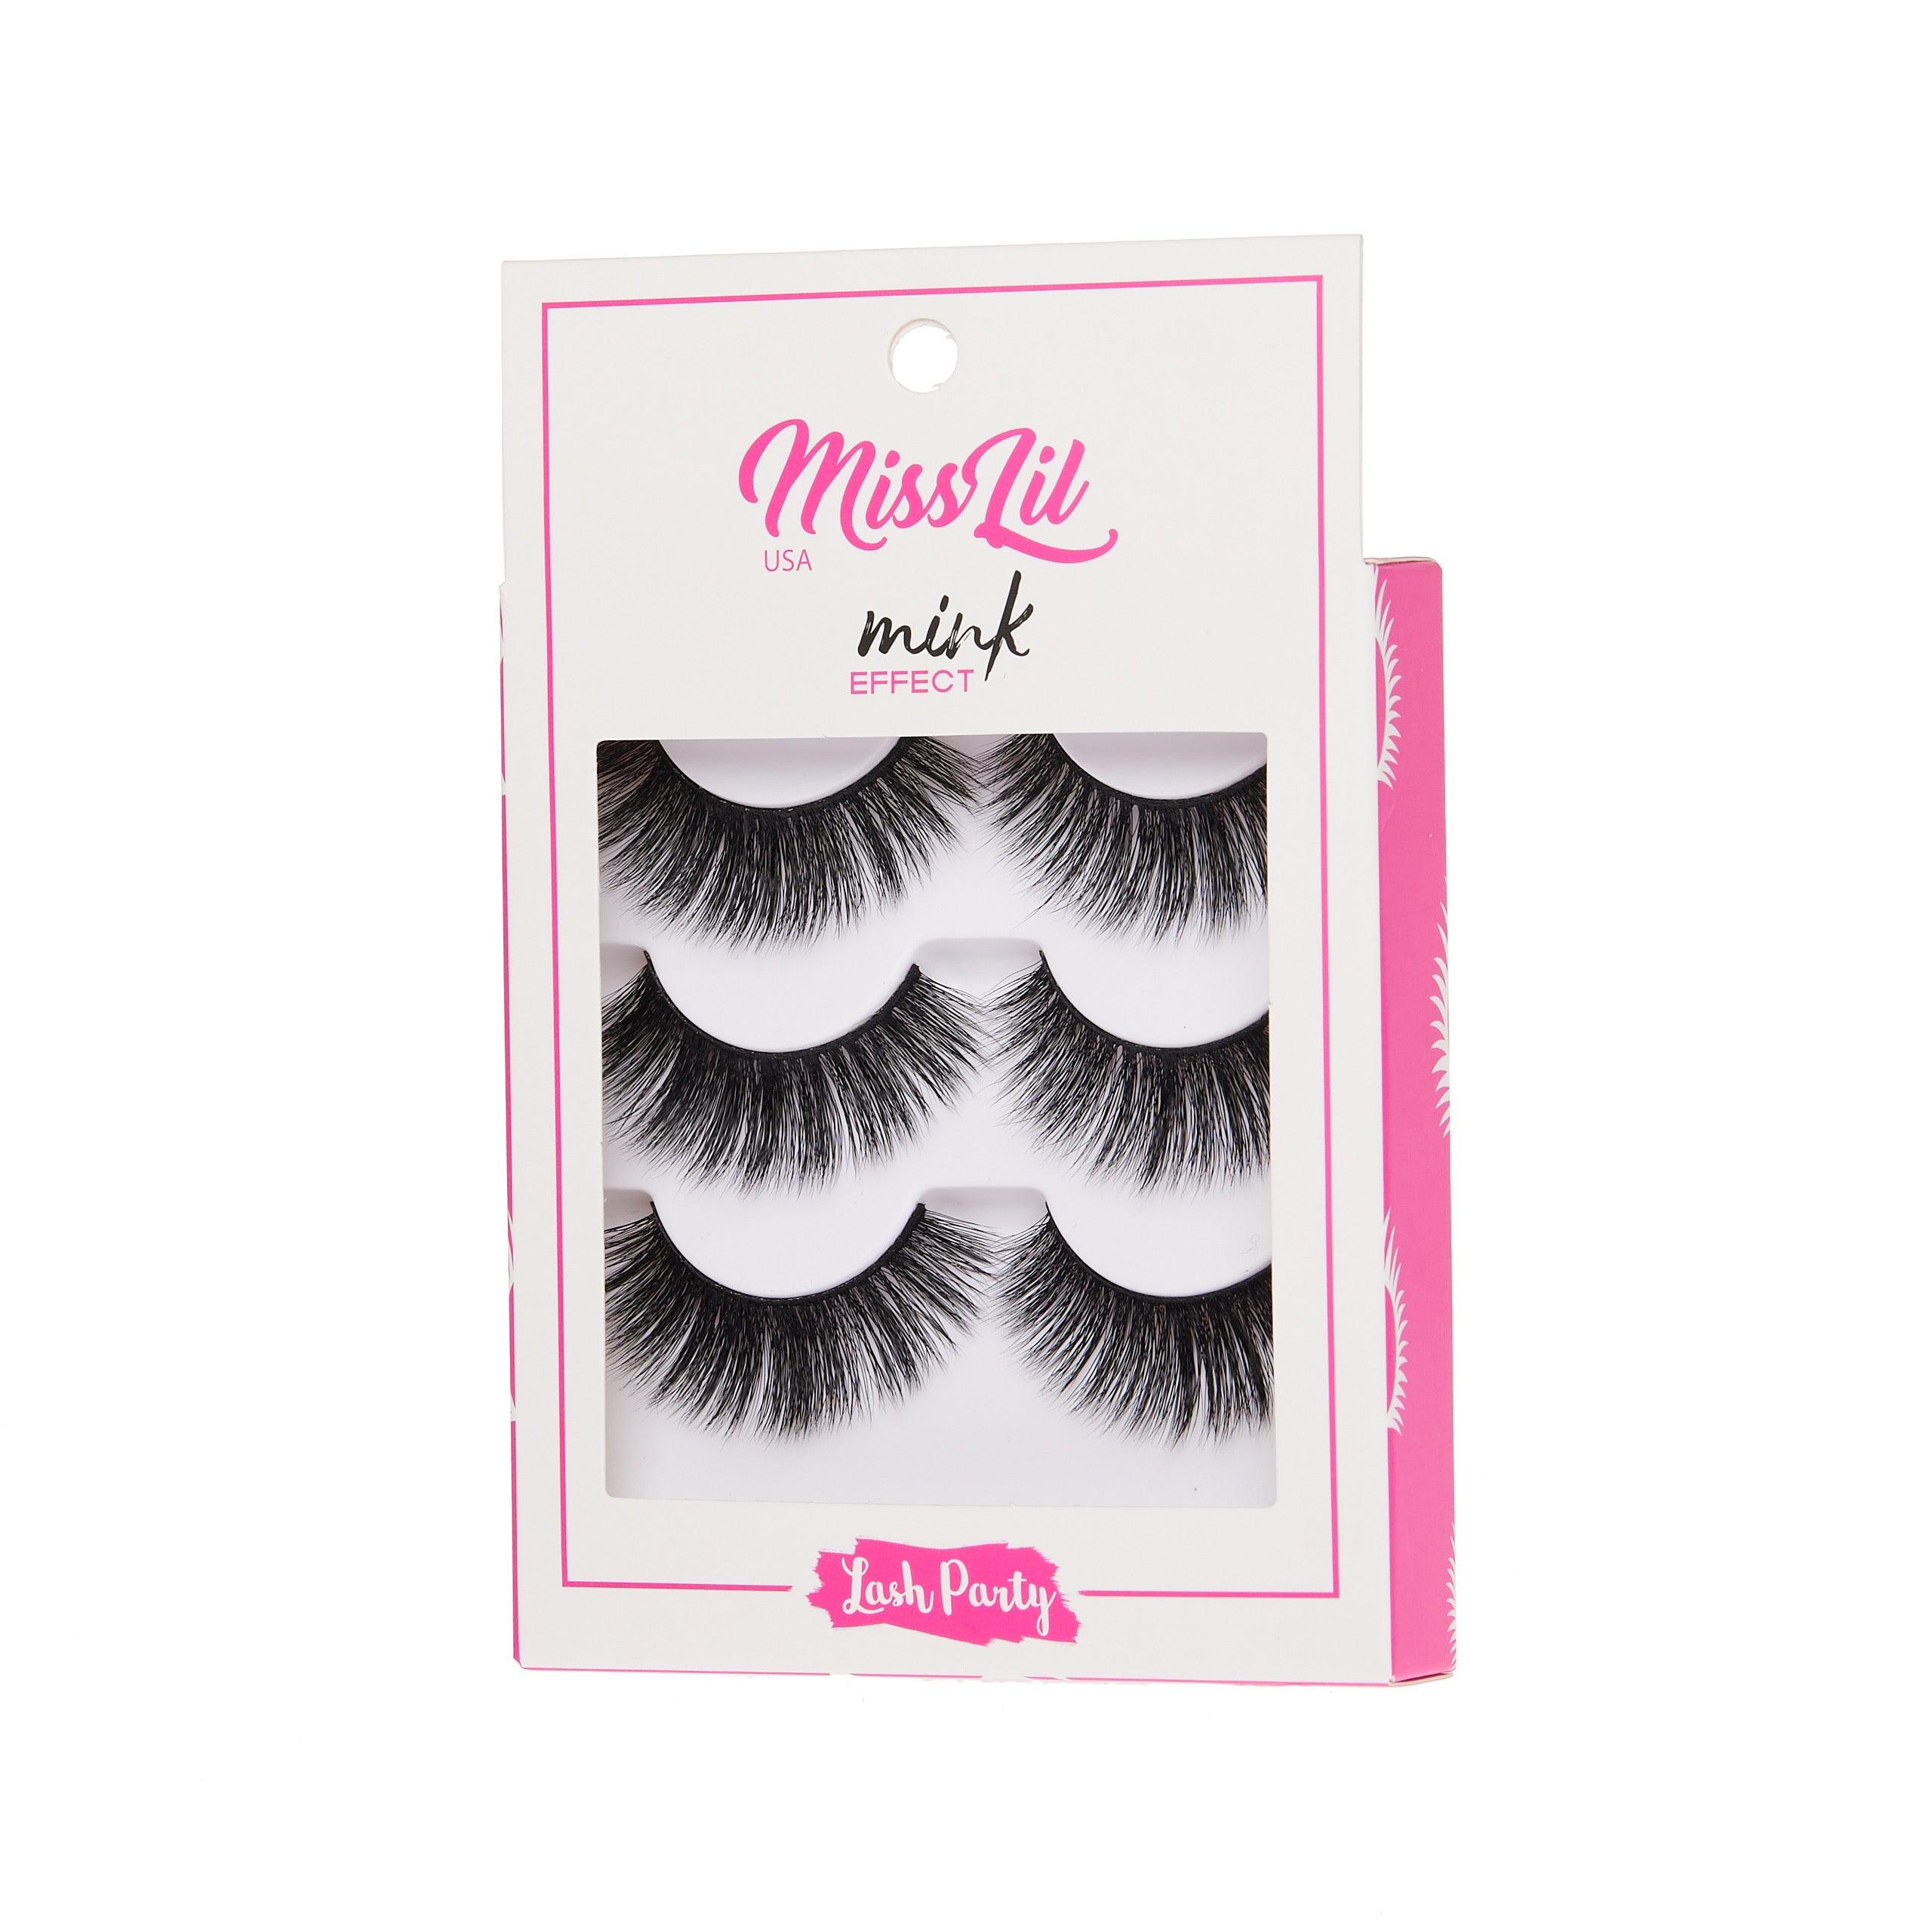 3-Pair Faux Mink Effect Eyelashes - Lash Party Collection #11 - 3 Pack